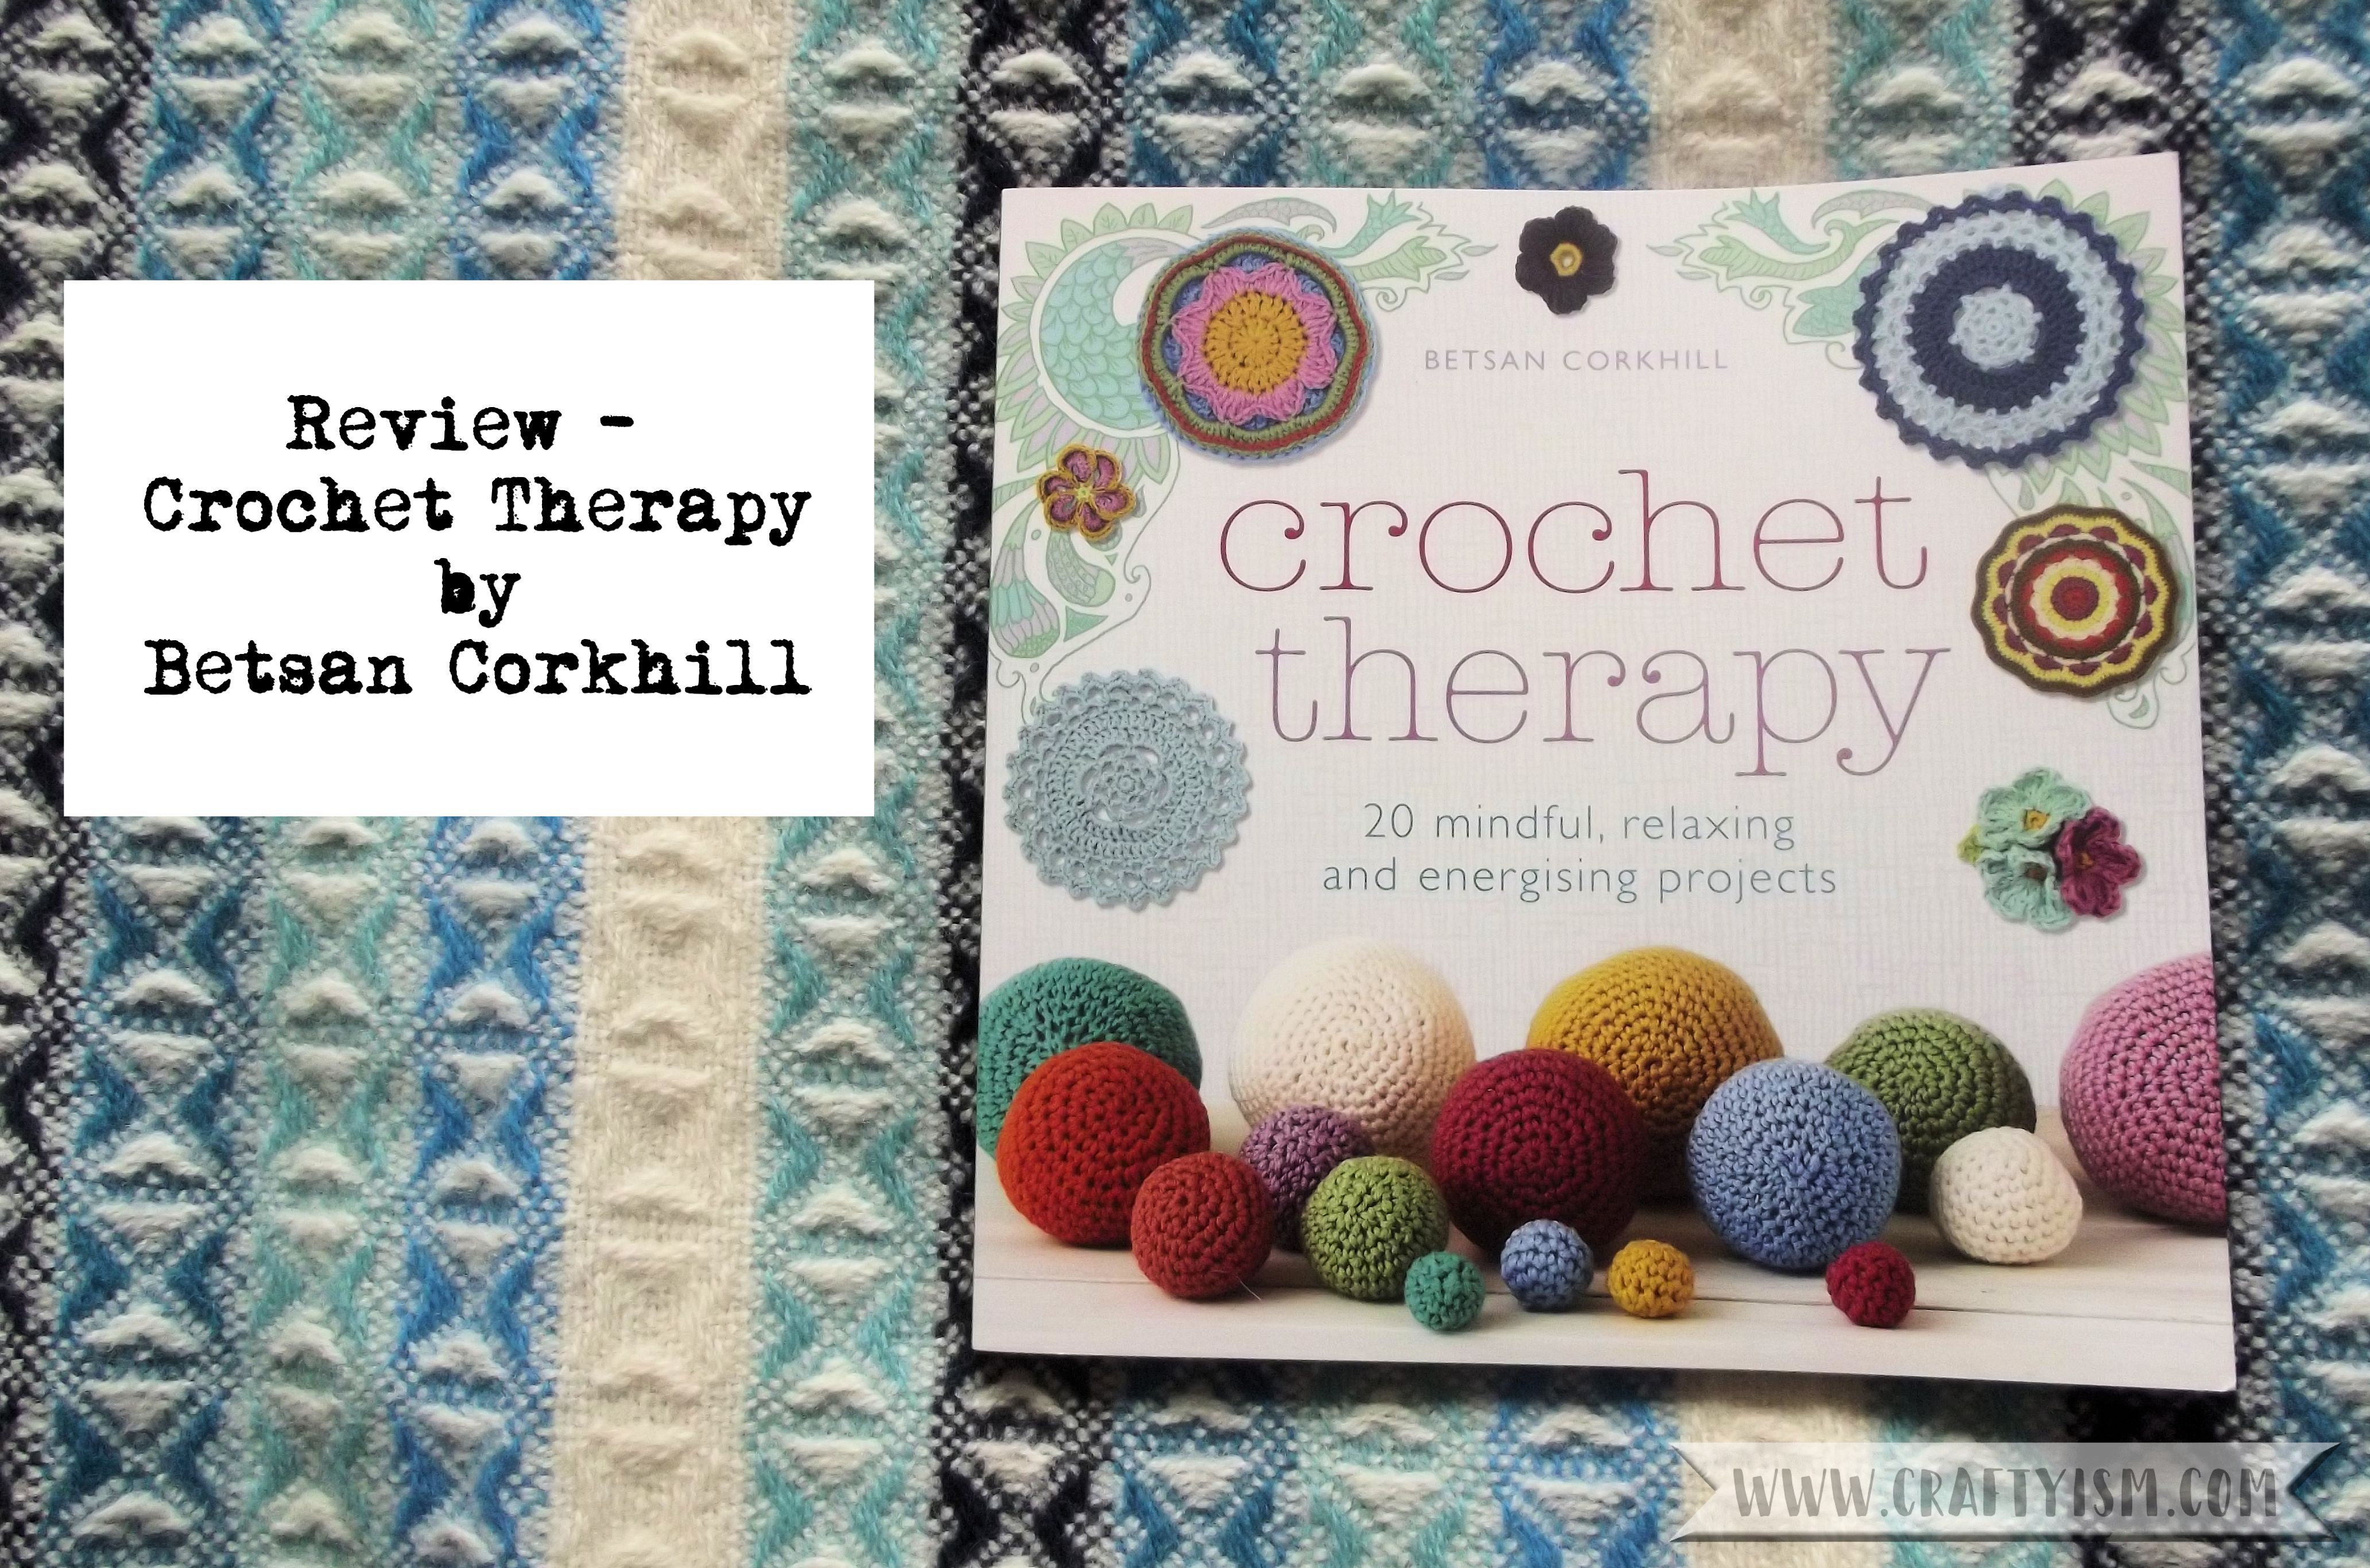 Review Crochet Therapy by Betsan Corkhill